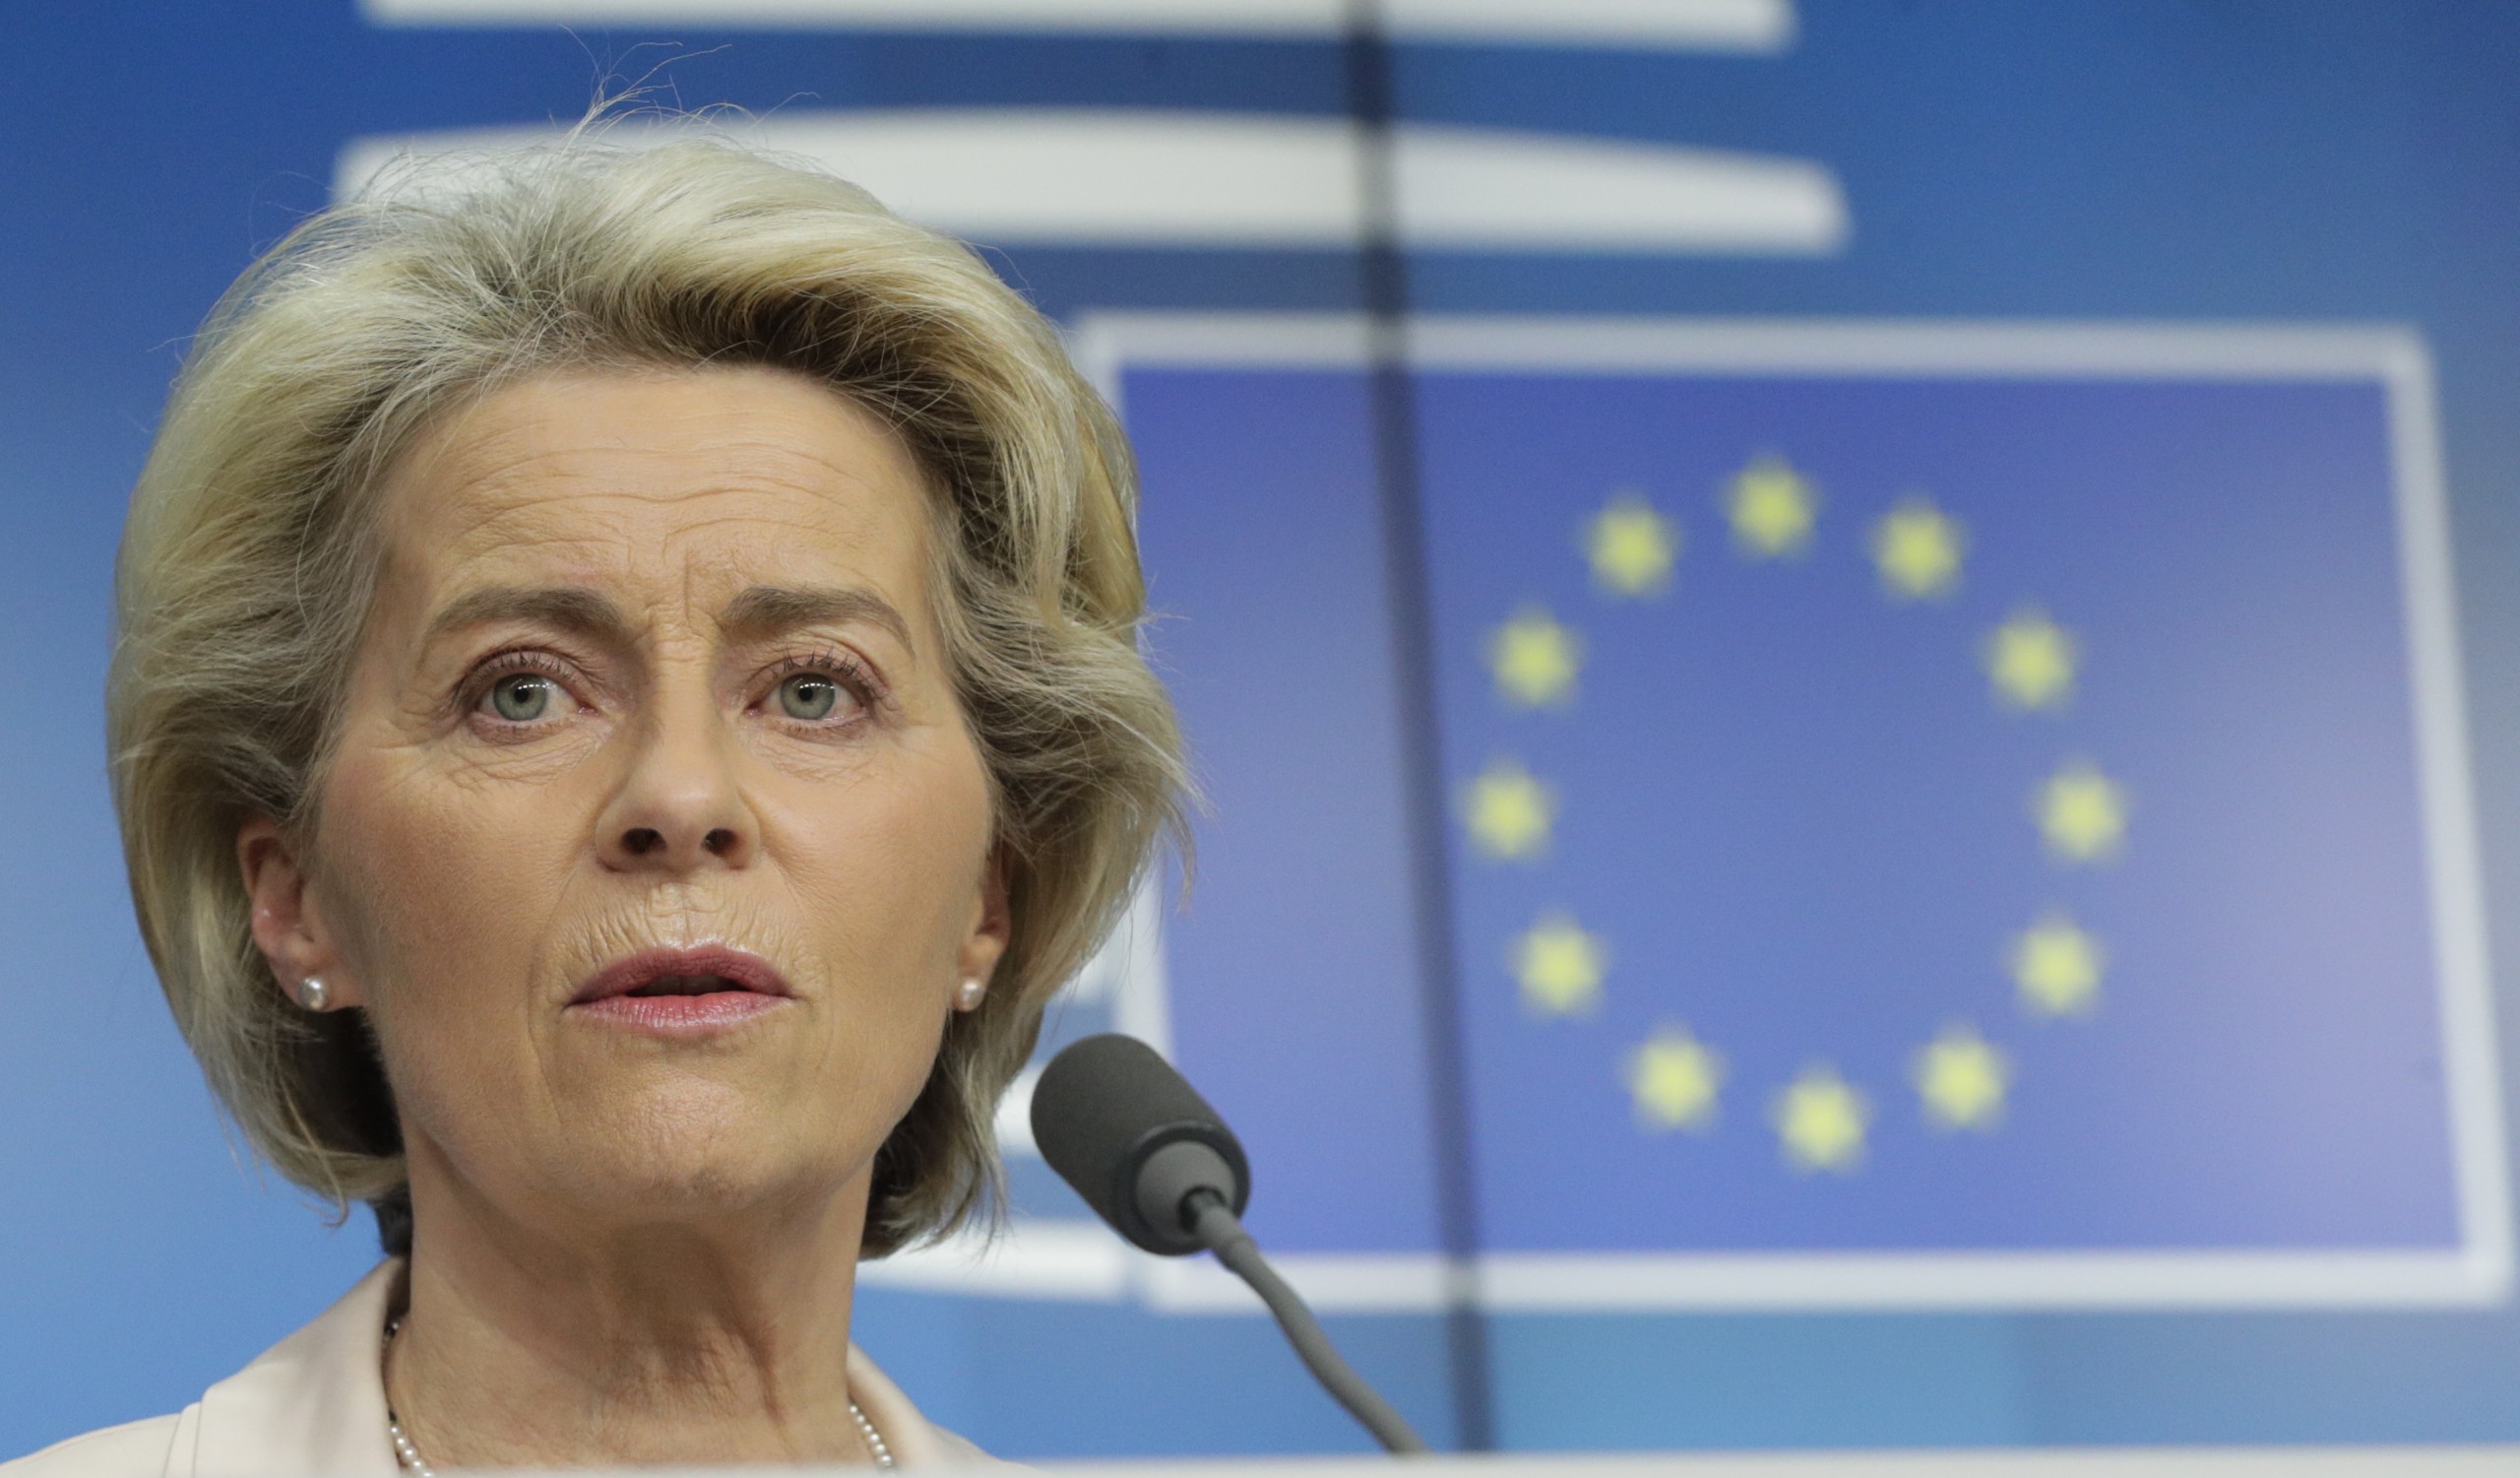 epa09849654 European Commission President Ursula von der Leyen gives a press conference at the end of a two day European Council Summit in Brussels, Belgium, 25 March 2022.  EPA/OLIVIER HOSLET